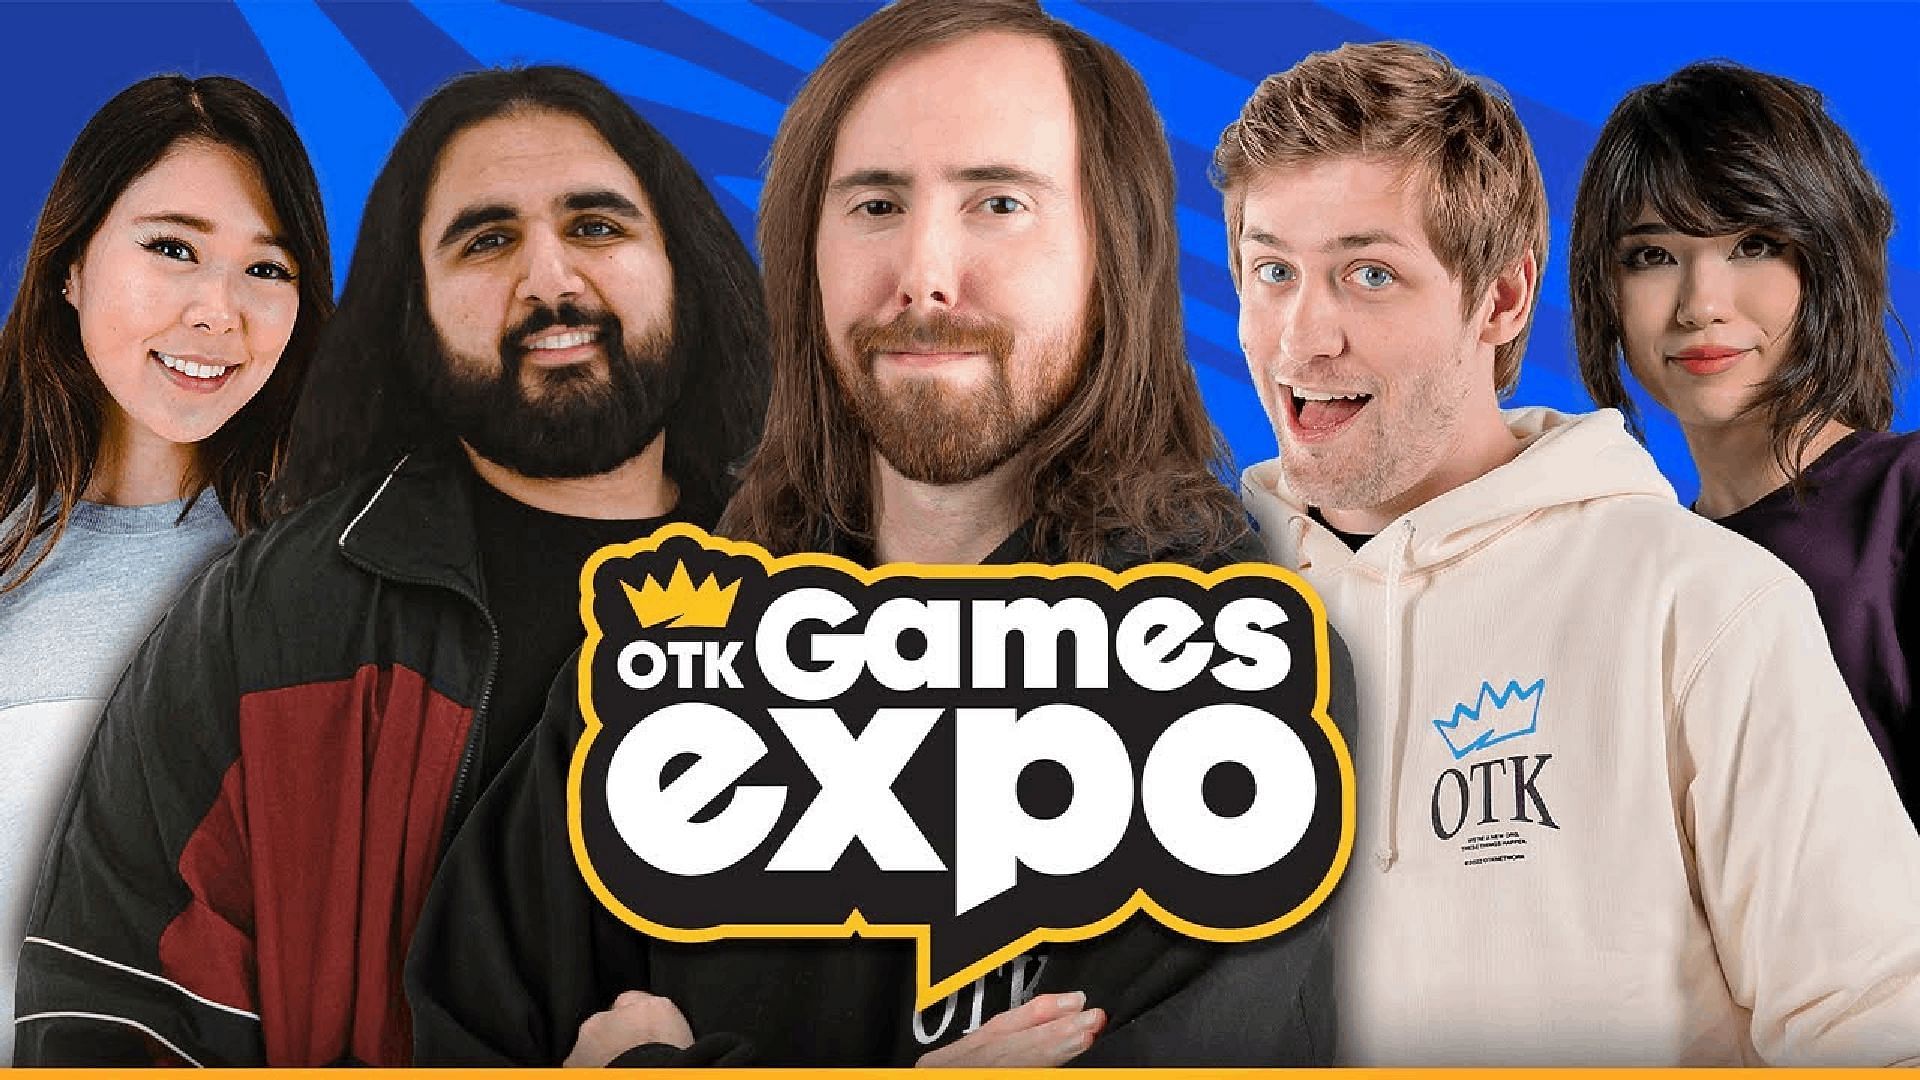 OTK Games Expo is a yearly event hosted by members like Asmongold and Esfand (Image via OTKGamesExpo)